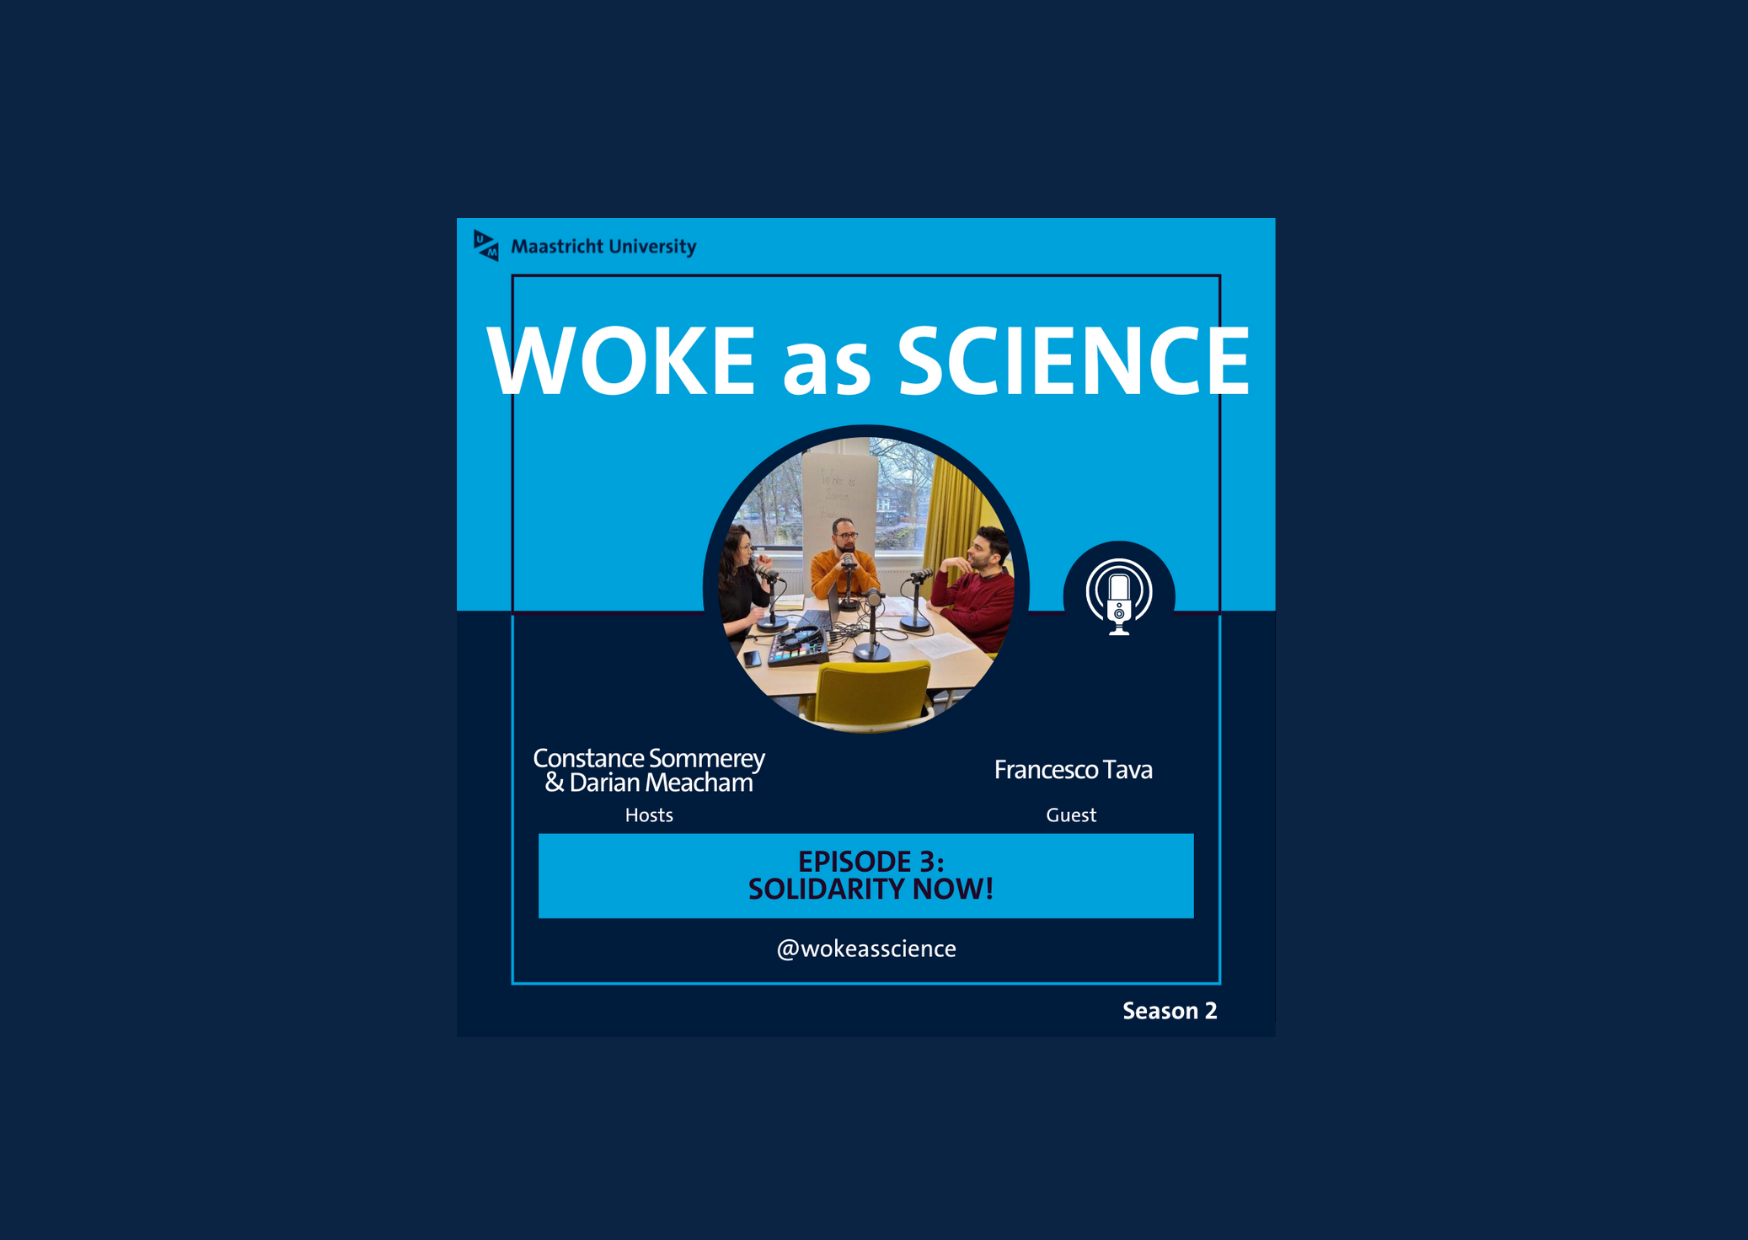 Woke as Science Episode 3 titled 'Solidarity Now!' In the middle, a photo of the hosts Darian and Constance sitting by a table with their guest Francesco Tava.